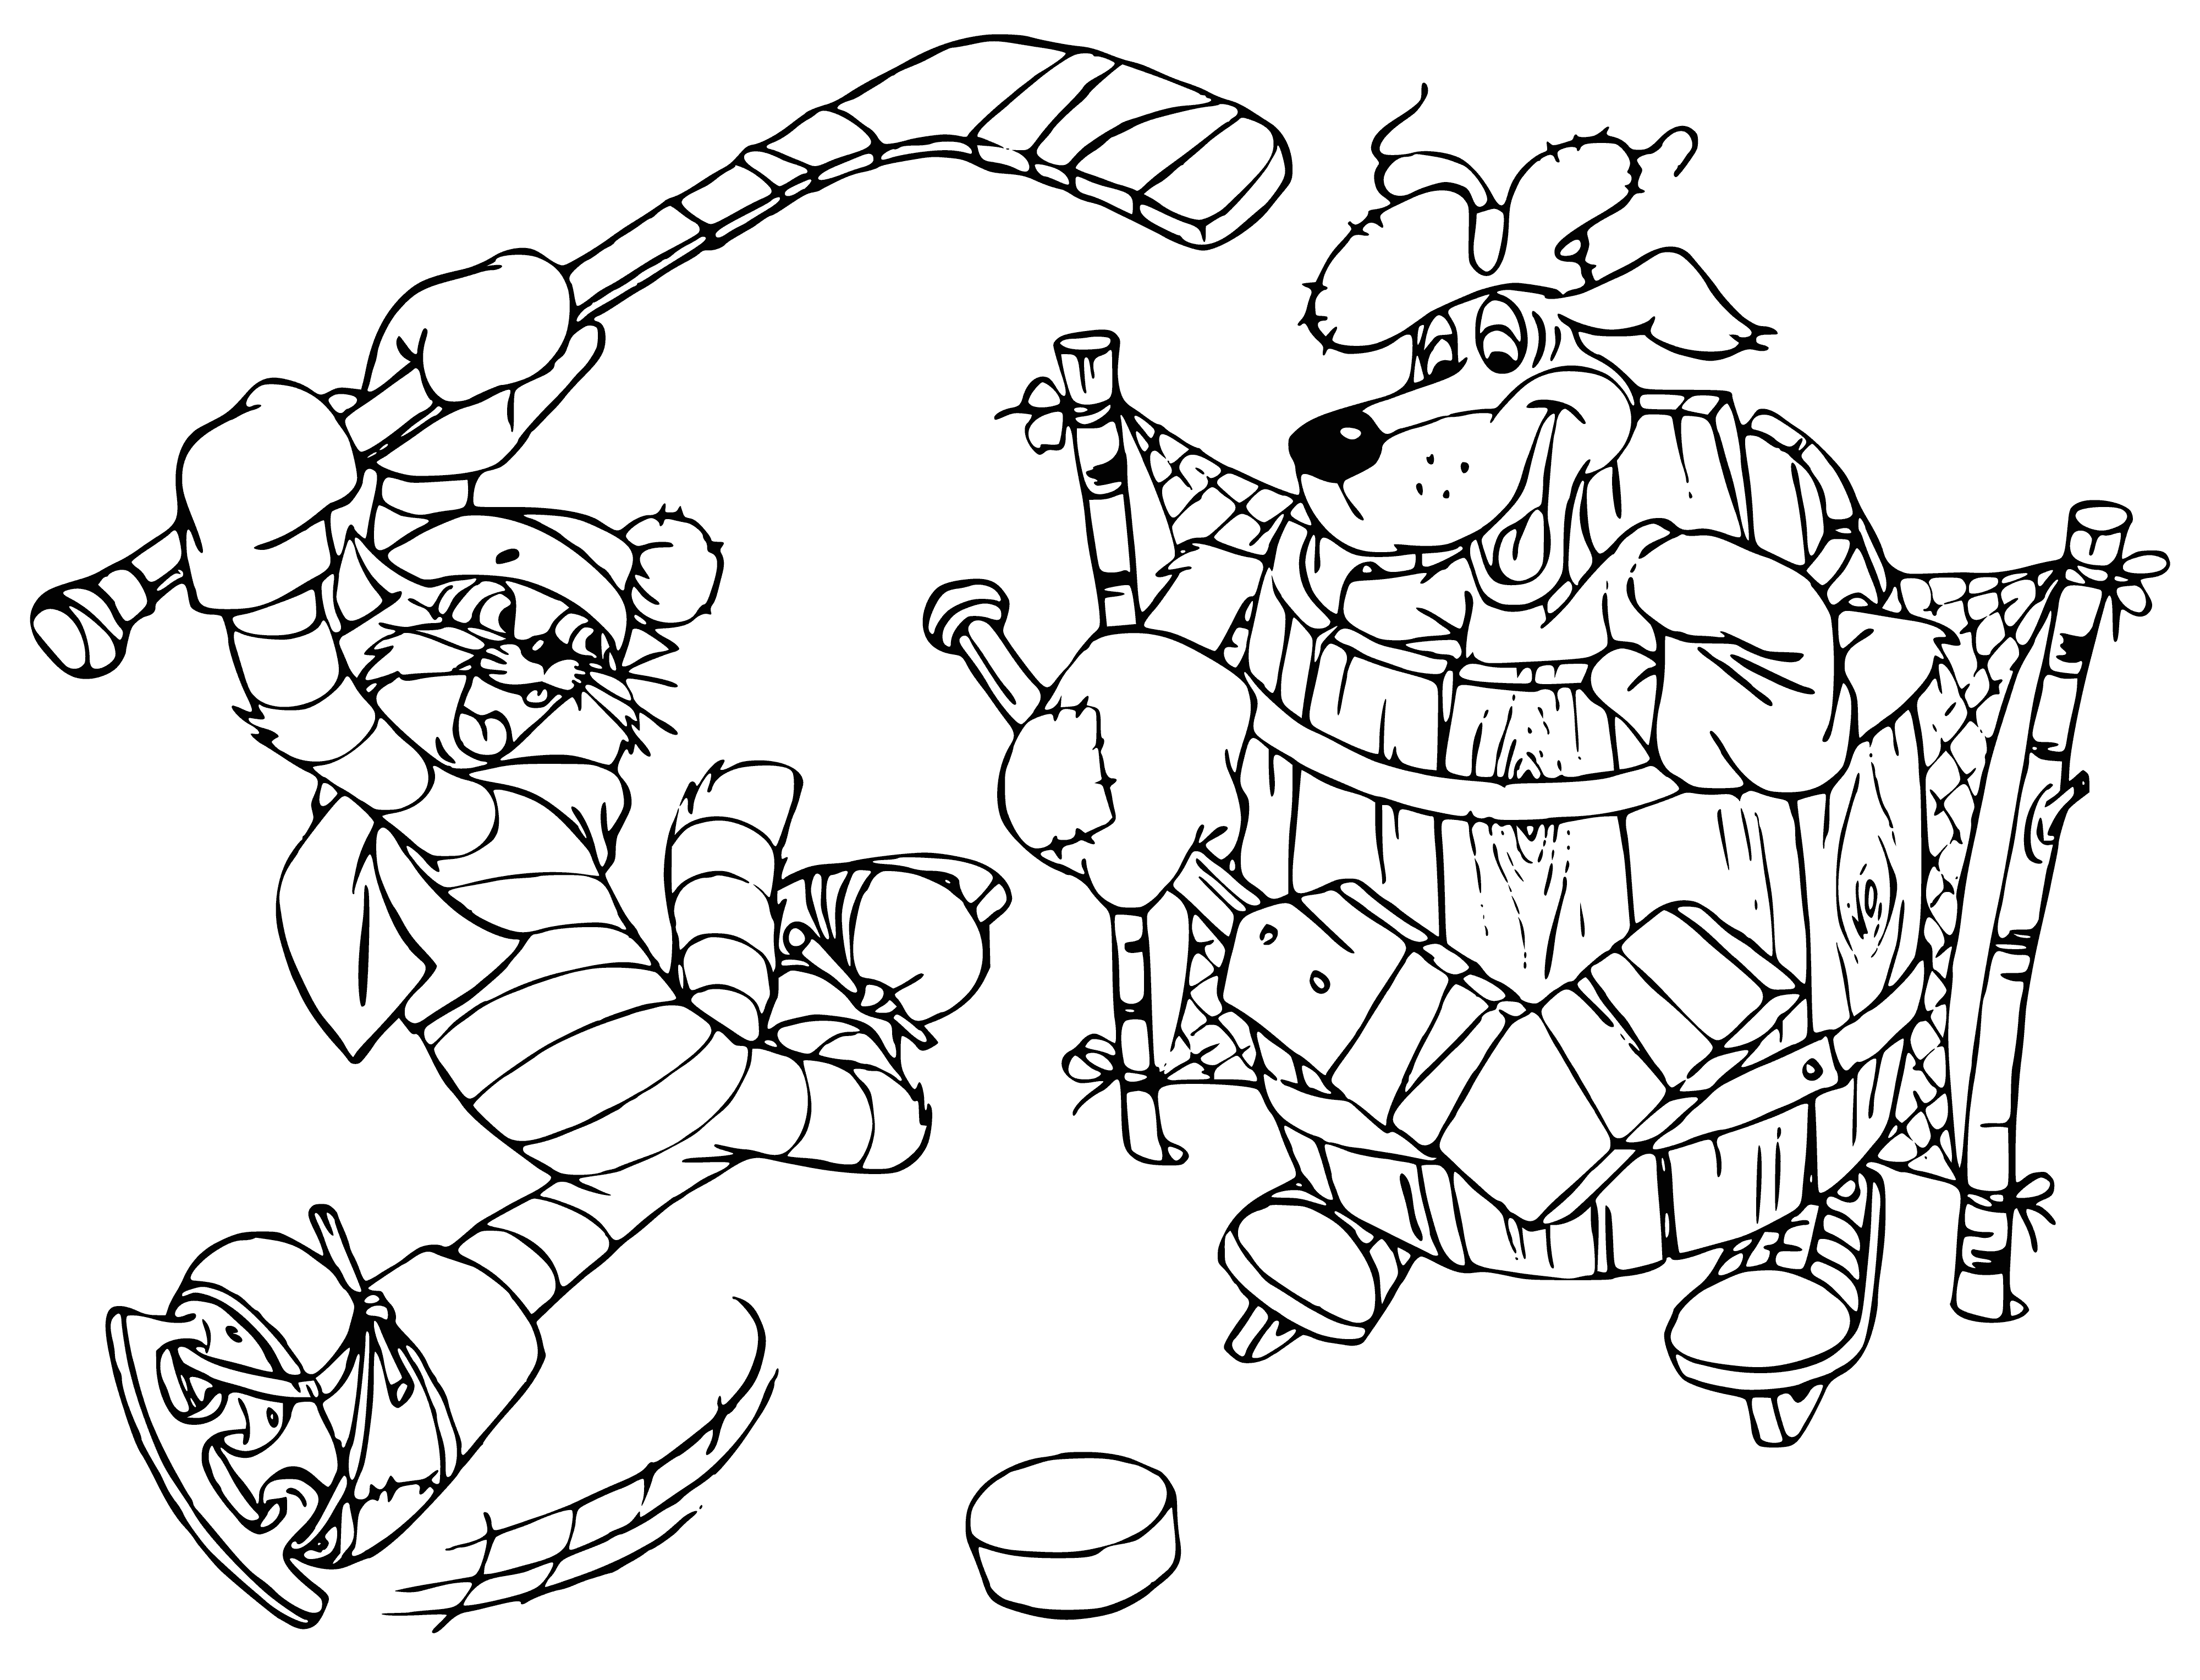 coloring page: Two dogs playing hockey on a frozen pond: Matroskin in a uniform, Sharik in fur. Fun-filled match with stick-handling and net-hitting.